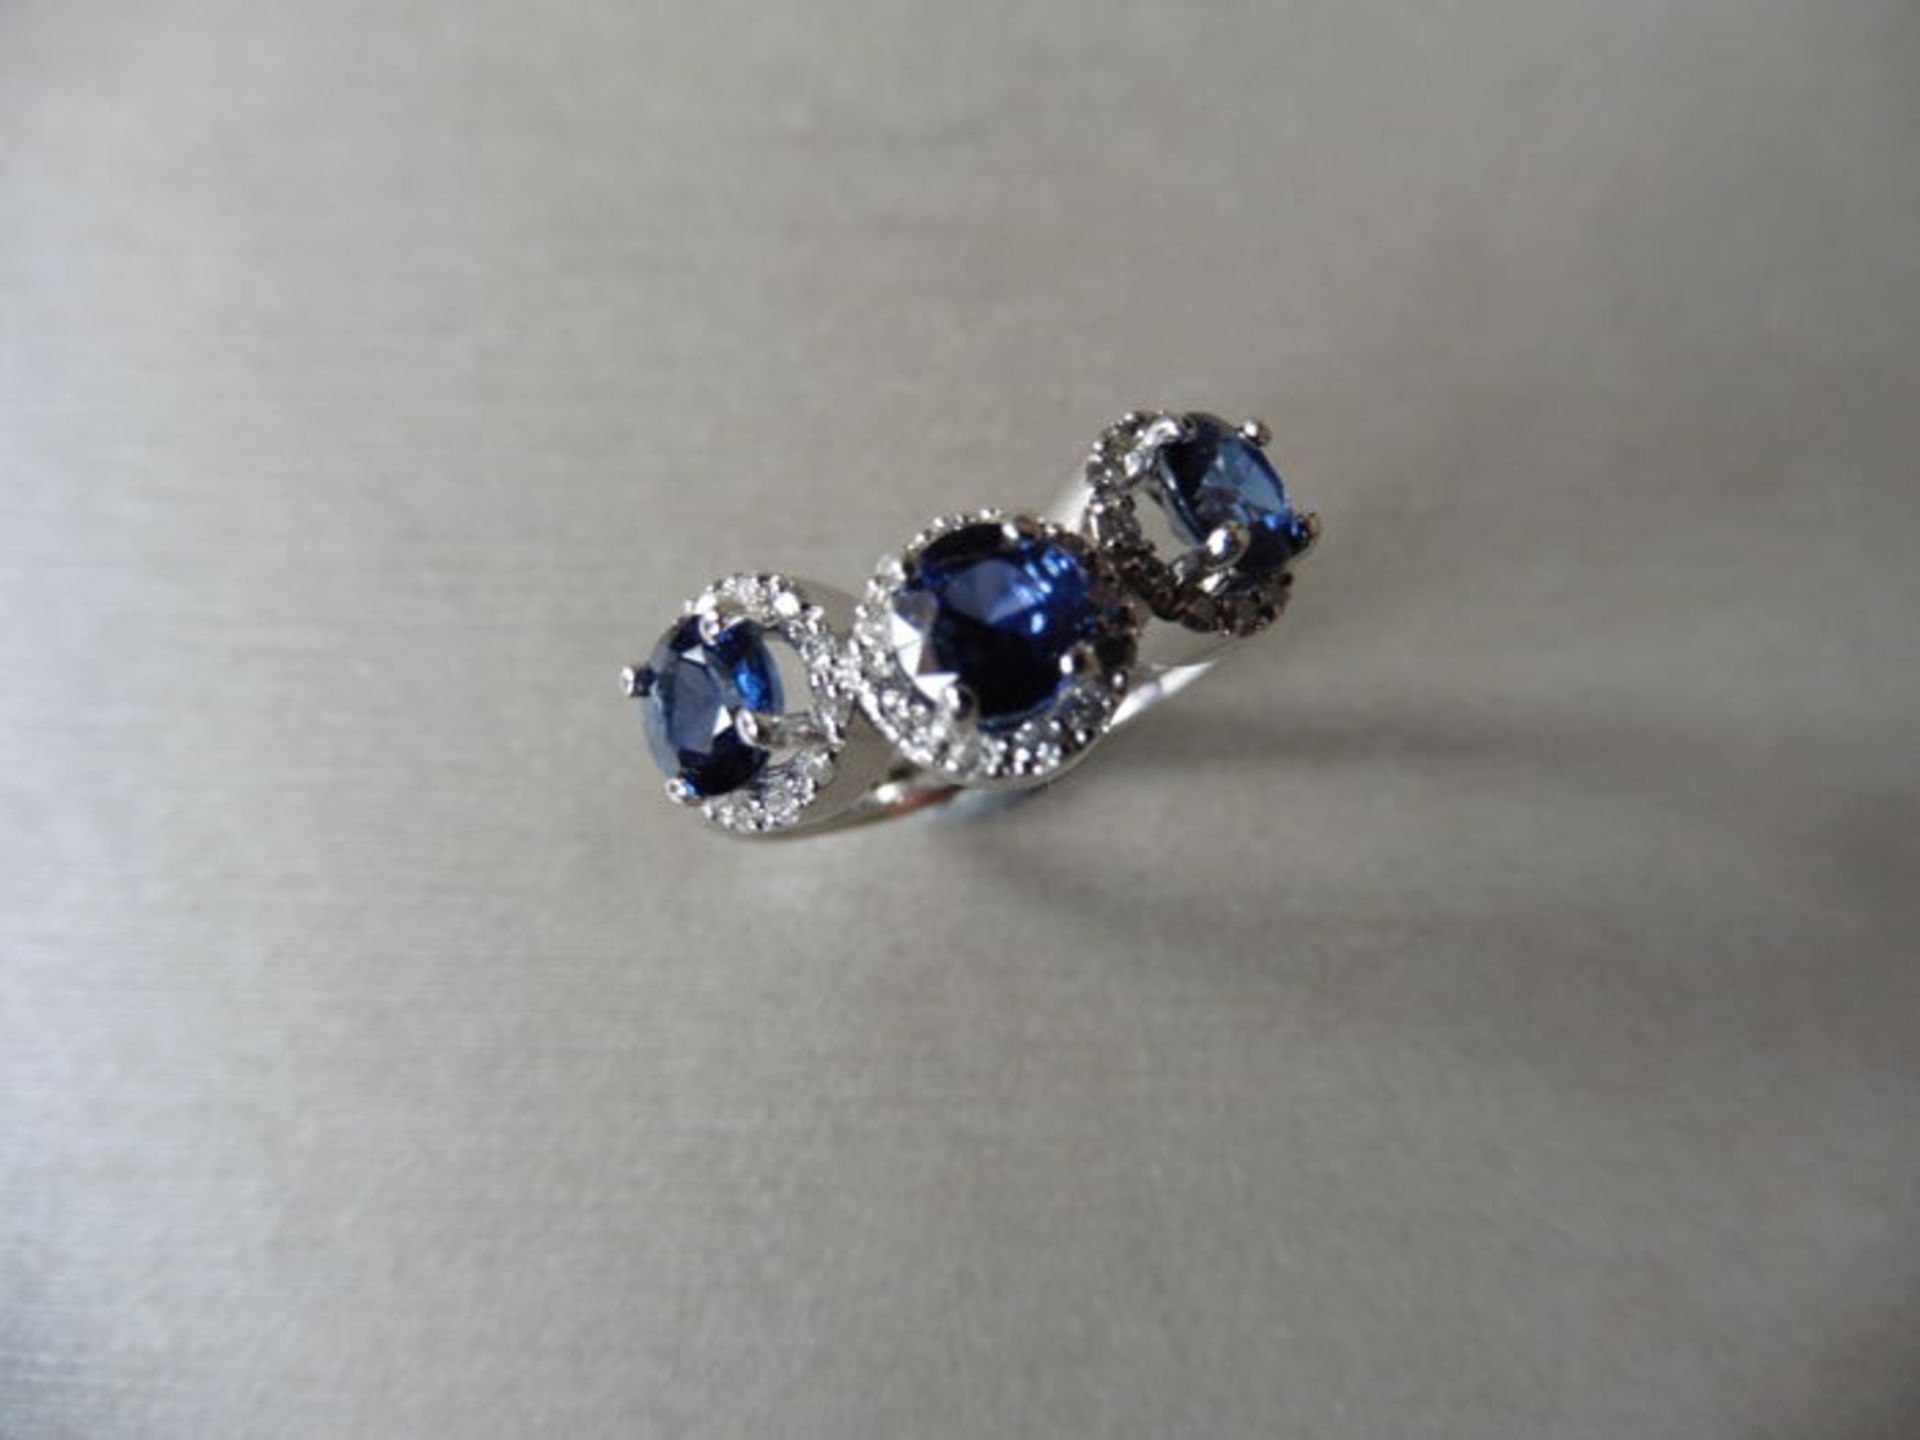 18ct white gold trilogy ring set with 3 round cut sapphires weighing 0.70ct. These are surrounded in